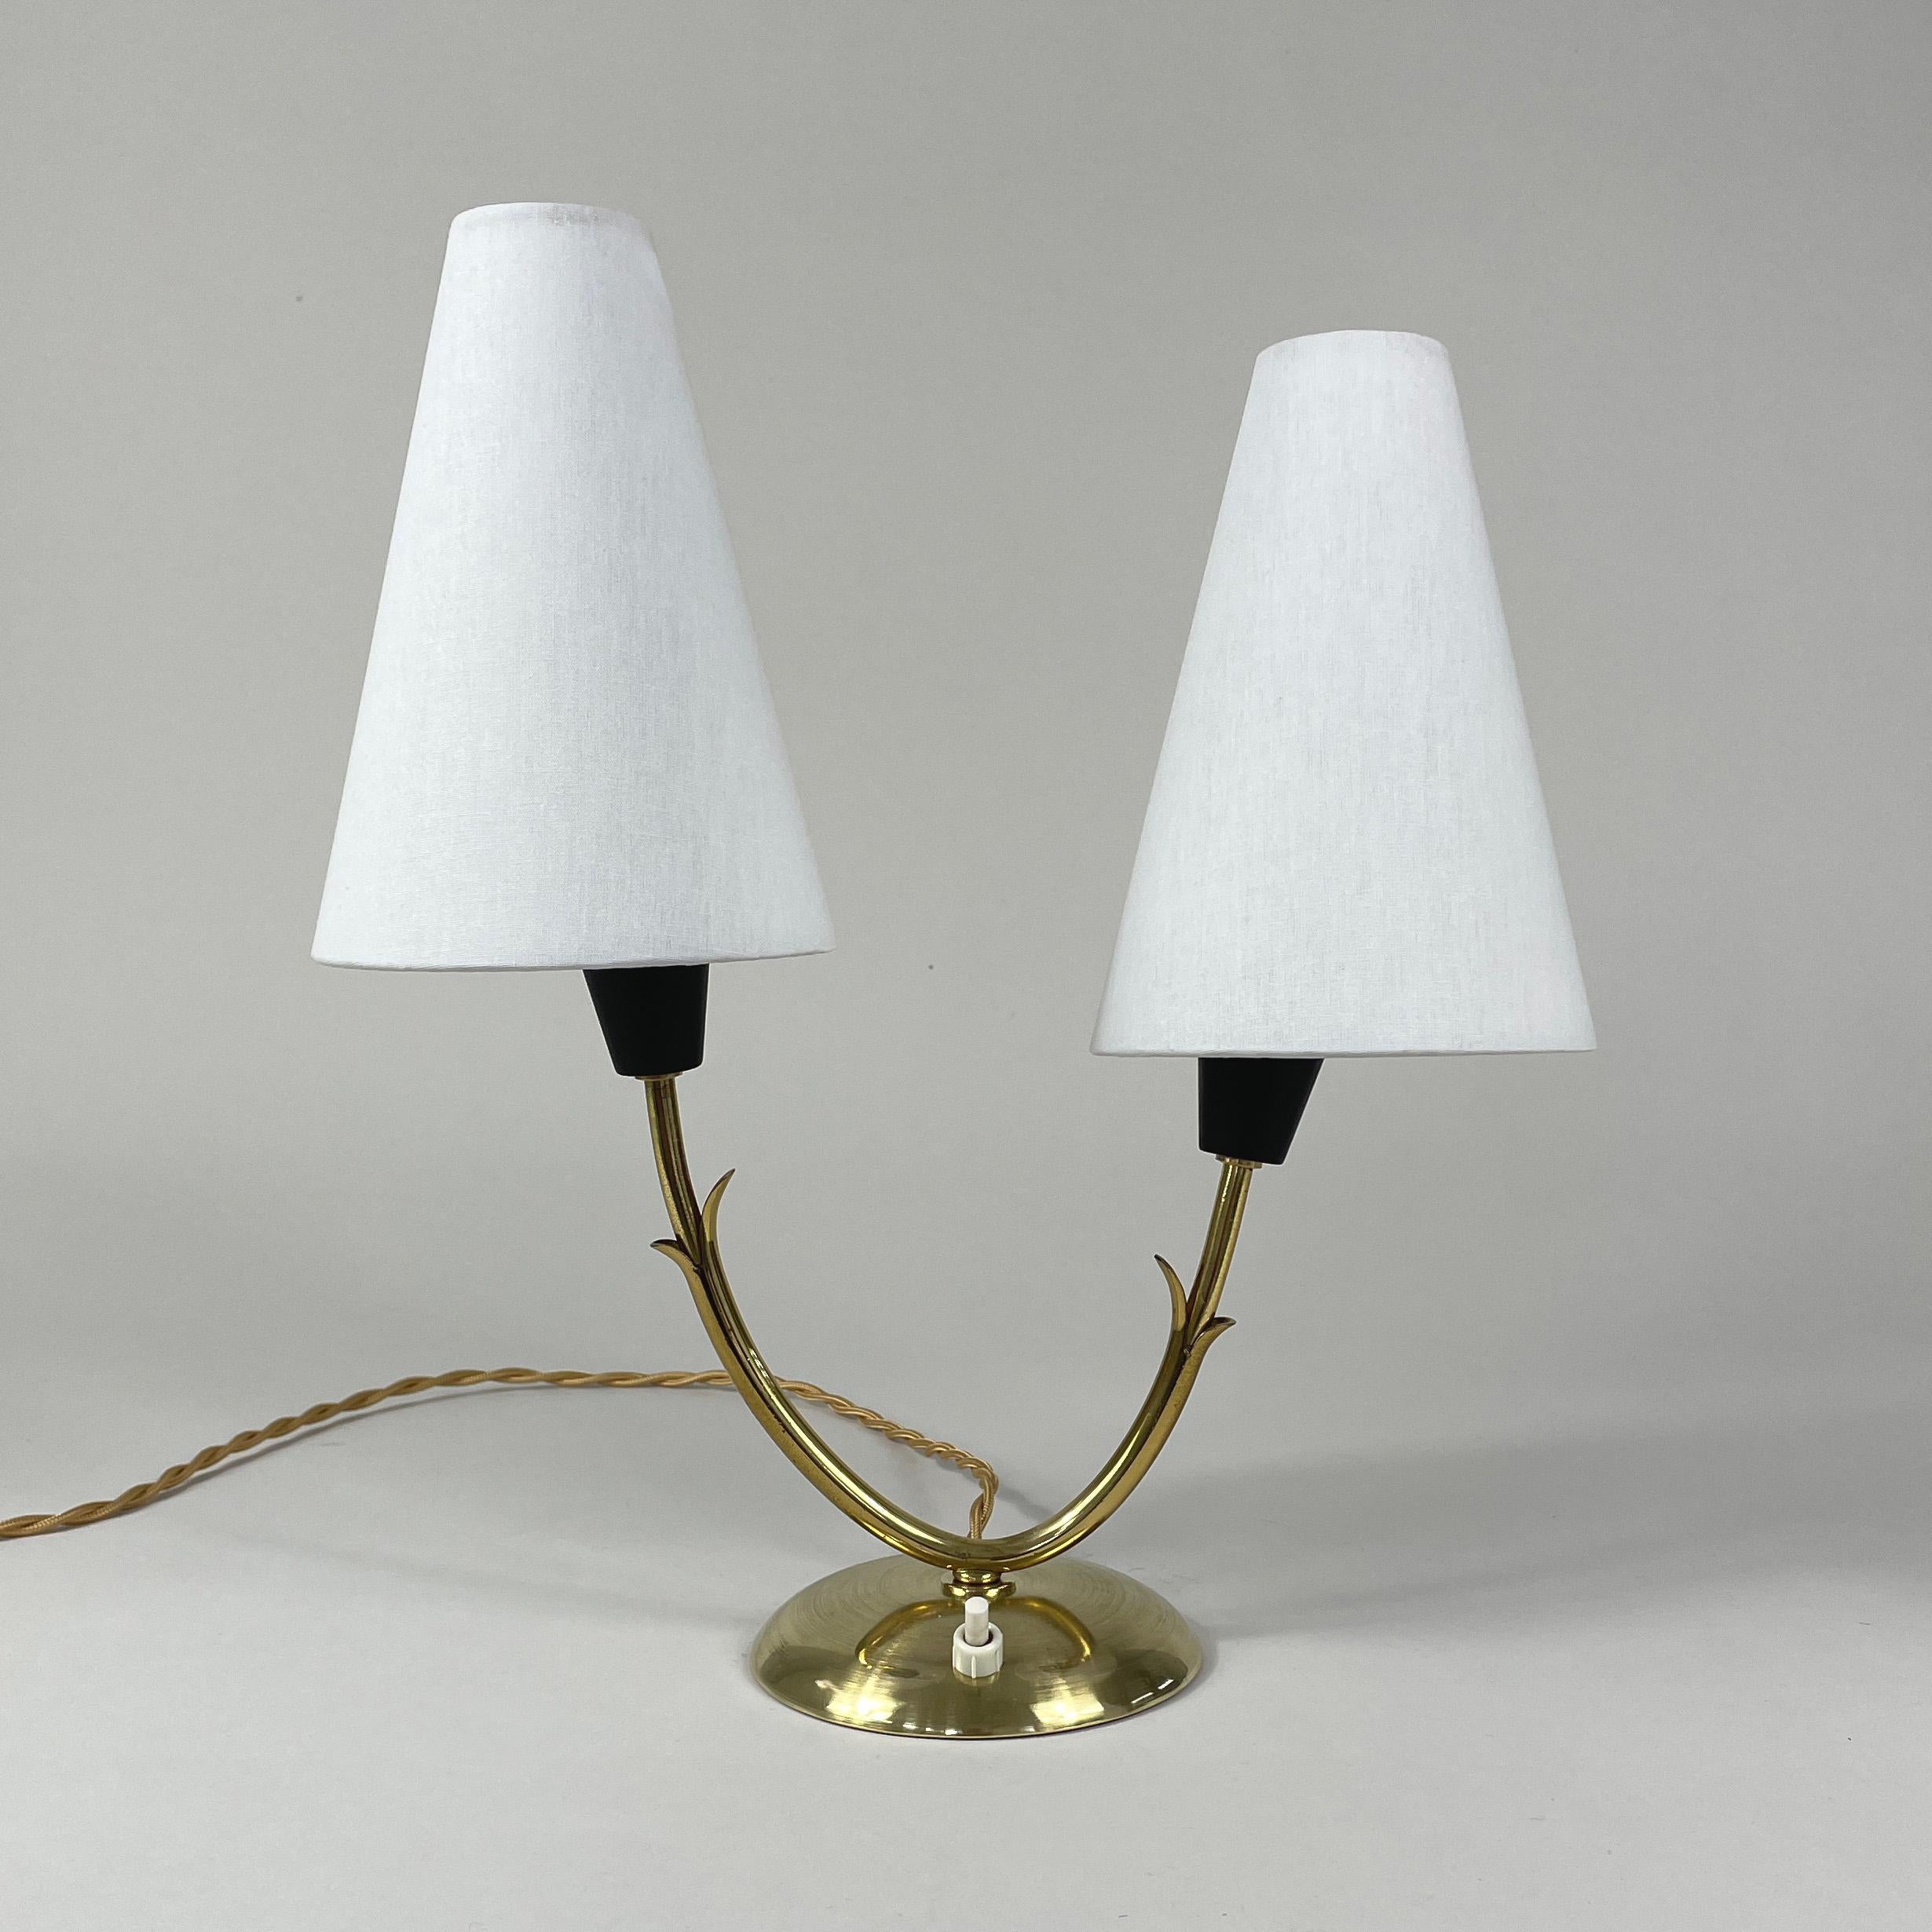 Double Arm Brass Table Lamp, Sweden 1950s For Sale 7